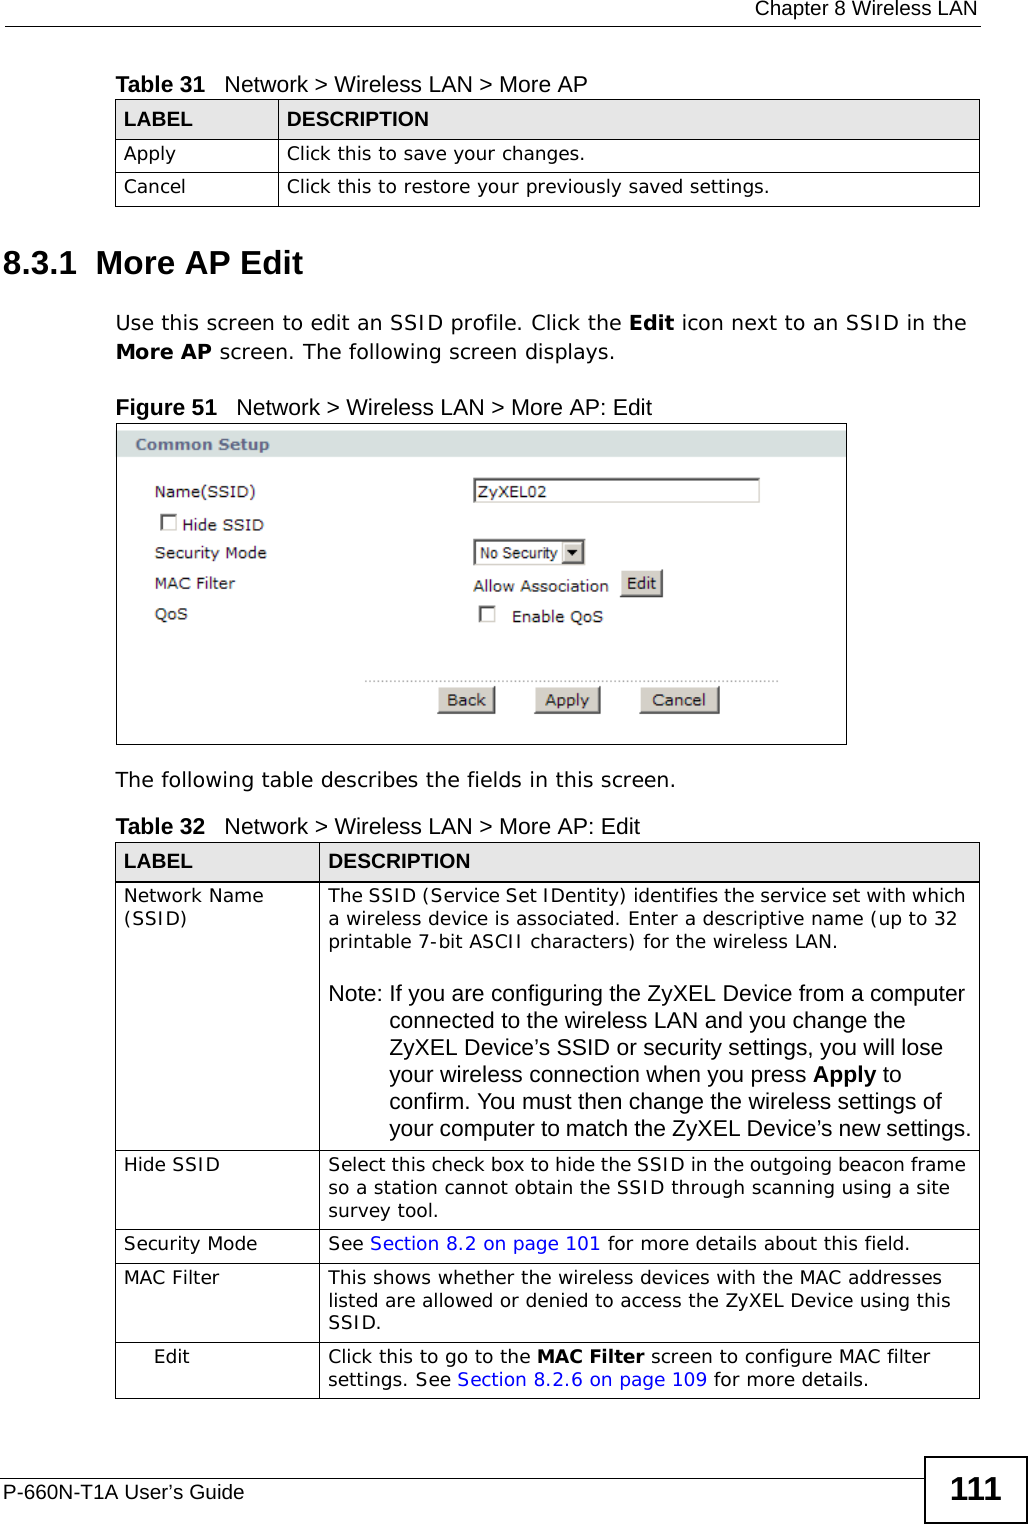  Chapter 8 Wireless LANP-660N-T1A User’s Guide 1118.3.1  More AP EditUse this screen to edit an SSID profile. Click the Edit icon next to an SSID in the More AP screen. The following screen displays.Figure 51   Network &gt; Wireless LAN &gt; More AP: EditThe following table describes the fields in this screen.Apply Click this to save your changes.Cancel Click this to restore your previously saved settings.Table 31   Network &gt; Wireless LAN &gt; More APLABEL DESCRIPTIONTable 32   Network &gt; Wireless LAN &gt; More AP: EditLABEL DESCRIPTIONNetwork Name (SSID) The SSID (Service Set IDentity) identifies the service set with which a wireless device is associated. Enter a descriptive name (up to 32 printable 7-bit ASCII characters) for the wireless LAN. Note: If you are configuring the ZyXEL Device from a computer connected to the wireless LAN and you change the ZyXEL Device’s SSID or security settings, you will lose your wireless connection when you press Apply to confirm. You must then change the wireless settings of your computer to match the ZyXEL Device’s new settings.Hide SSID Select this check box to hide the SSID in the outgoing beacon frame so a station cannot obtain the SSID through scanning using a site survey tool.Security Mode See Section 8.2 on page 101 for more details about this field.MAC Filter  This shows whether the wireless devices with the MAC addresses listed are allowed or denied to access the ZyXEL Device using this SSID.Edit Click this to go to the MAC Filter screen to configure MAC filter settings. See Section 8.2.6 on page 109 for more details.